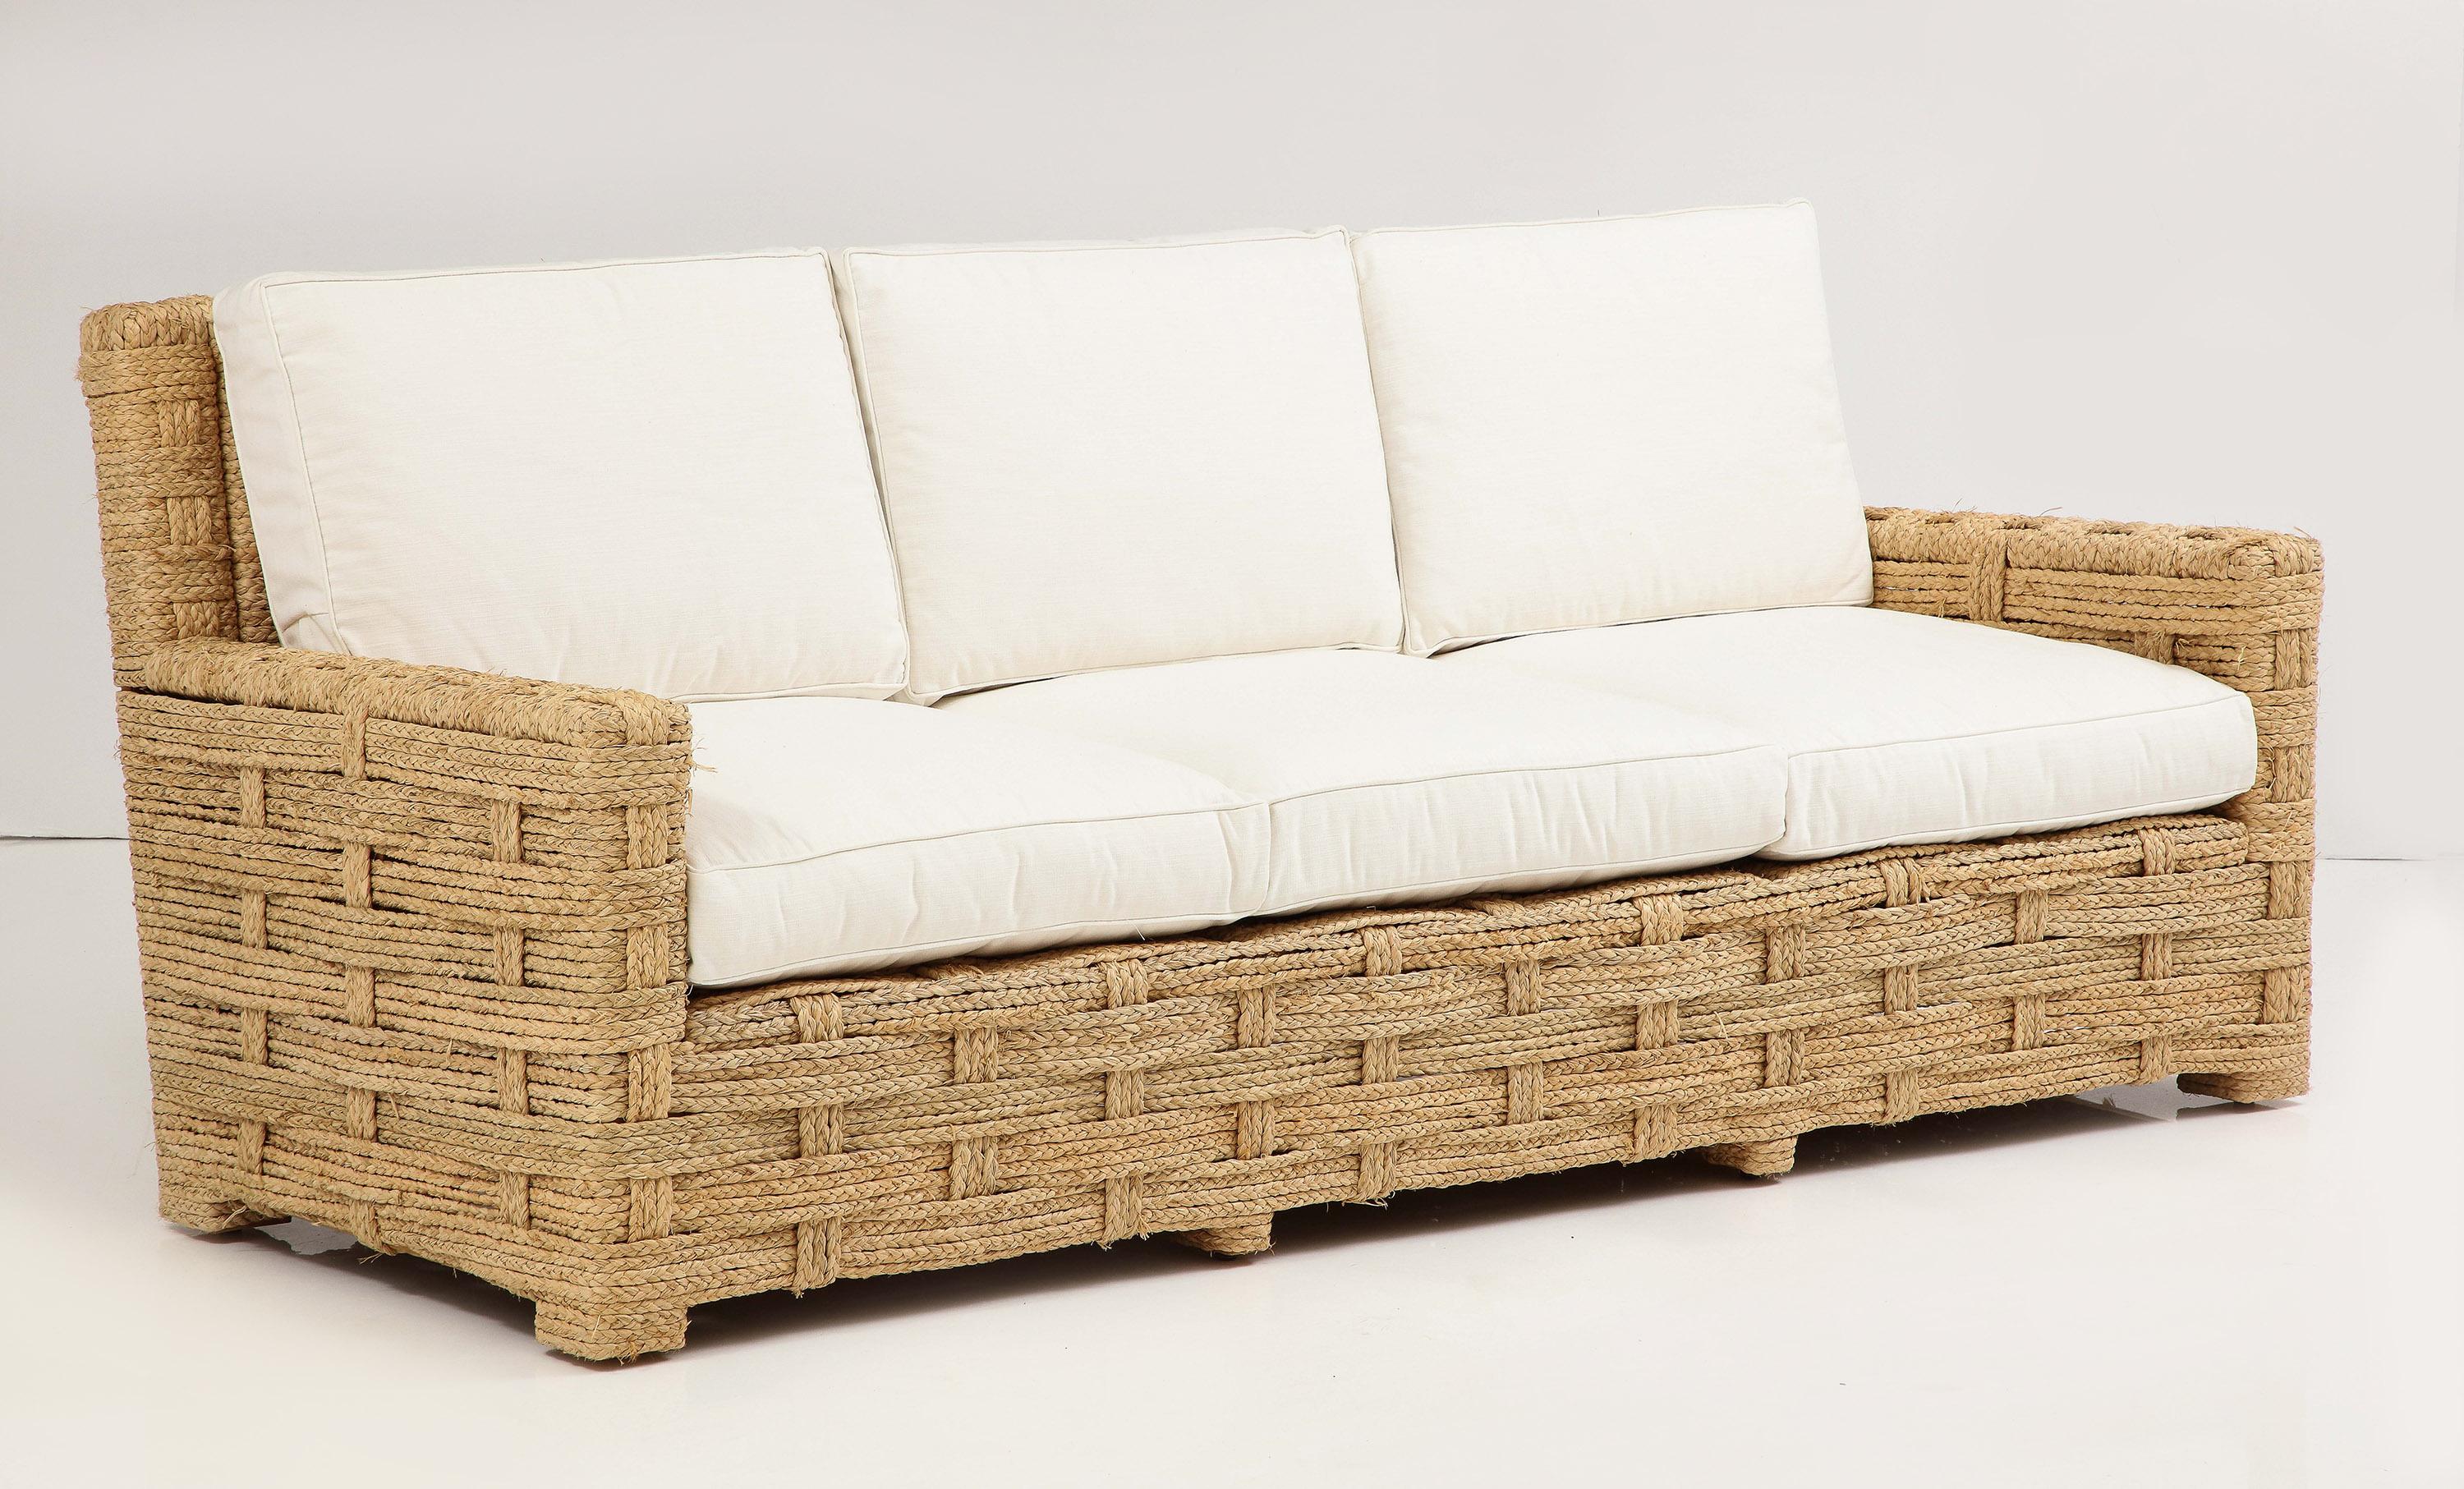 Consisting of a three-seat sofa and pair of arm chairs,
all in very fine original condition, the whole wrapped in braided raffia over an oak frame. 
Chairs: 34.75H x 28W x 34.75D - Seat H. 17.32